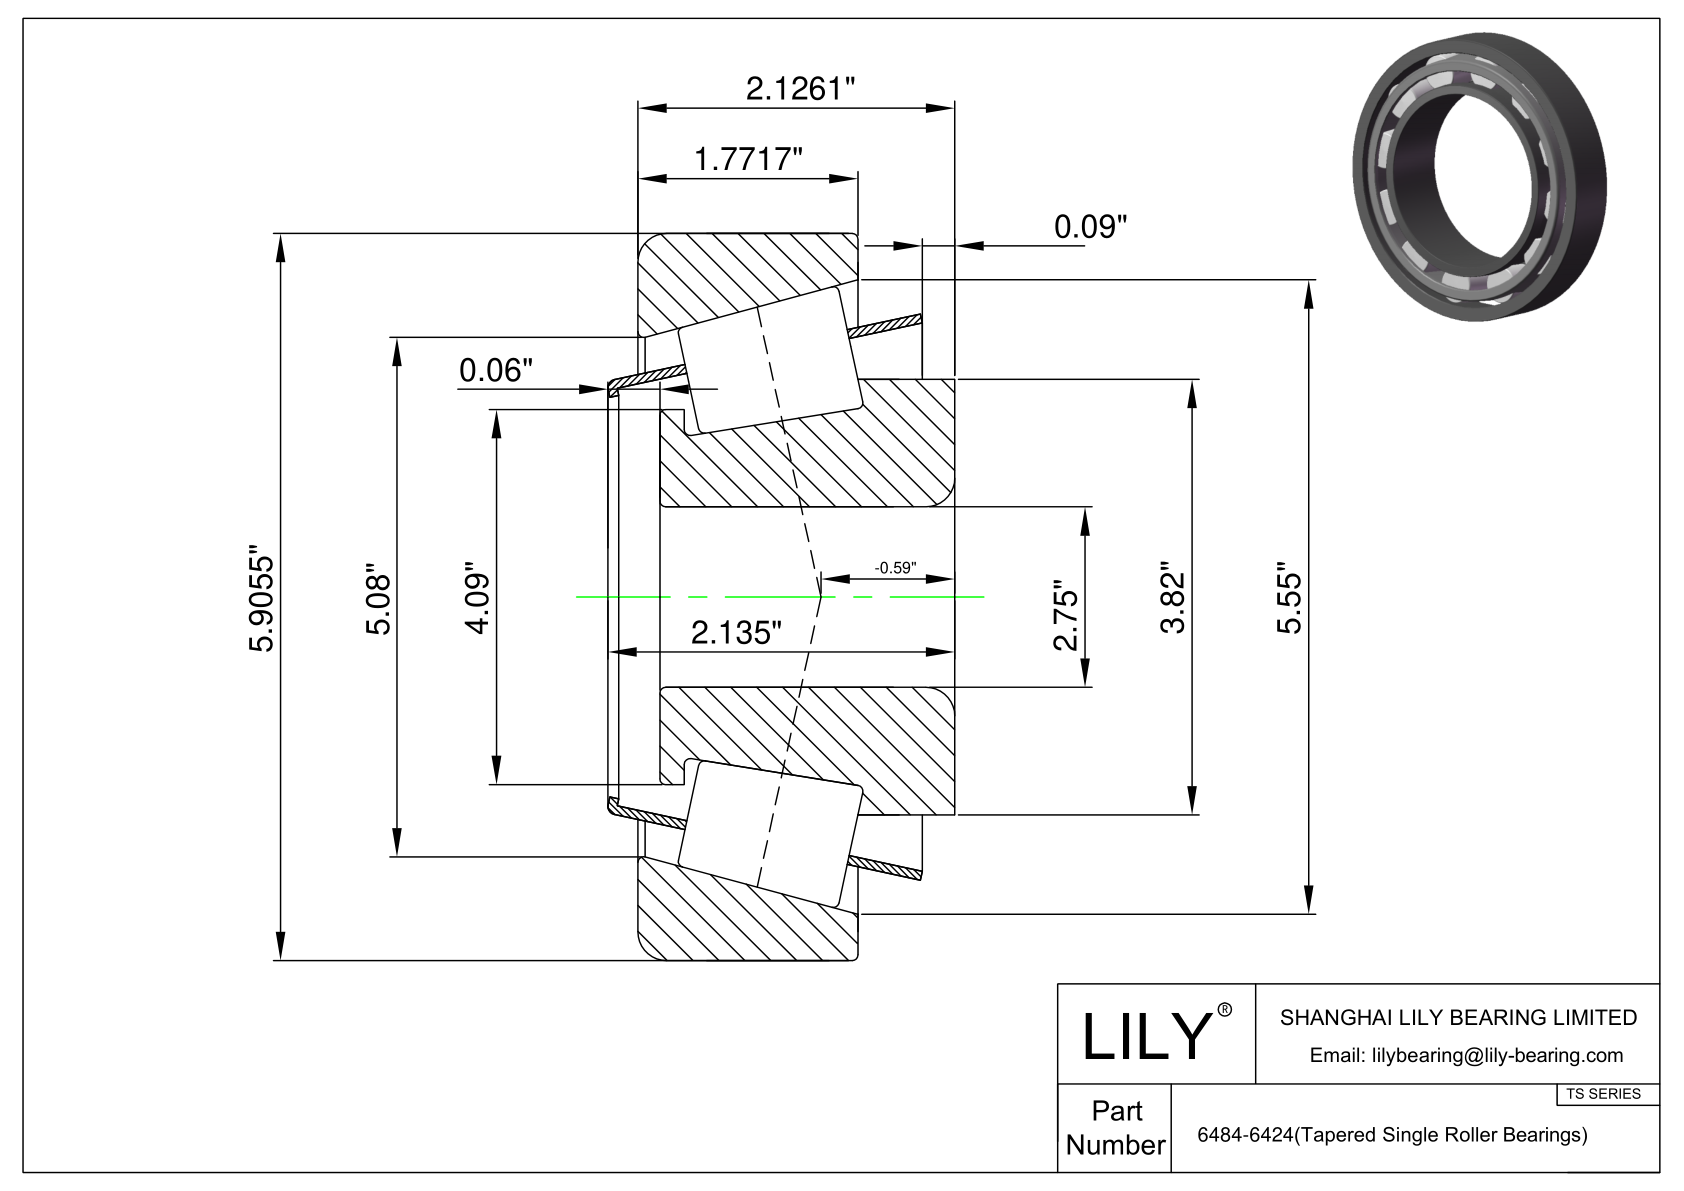 6484-6424 TS (Tapered Single Roller Bearings) (Imperial) cad drawing